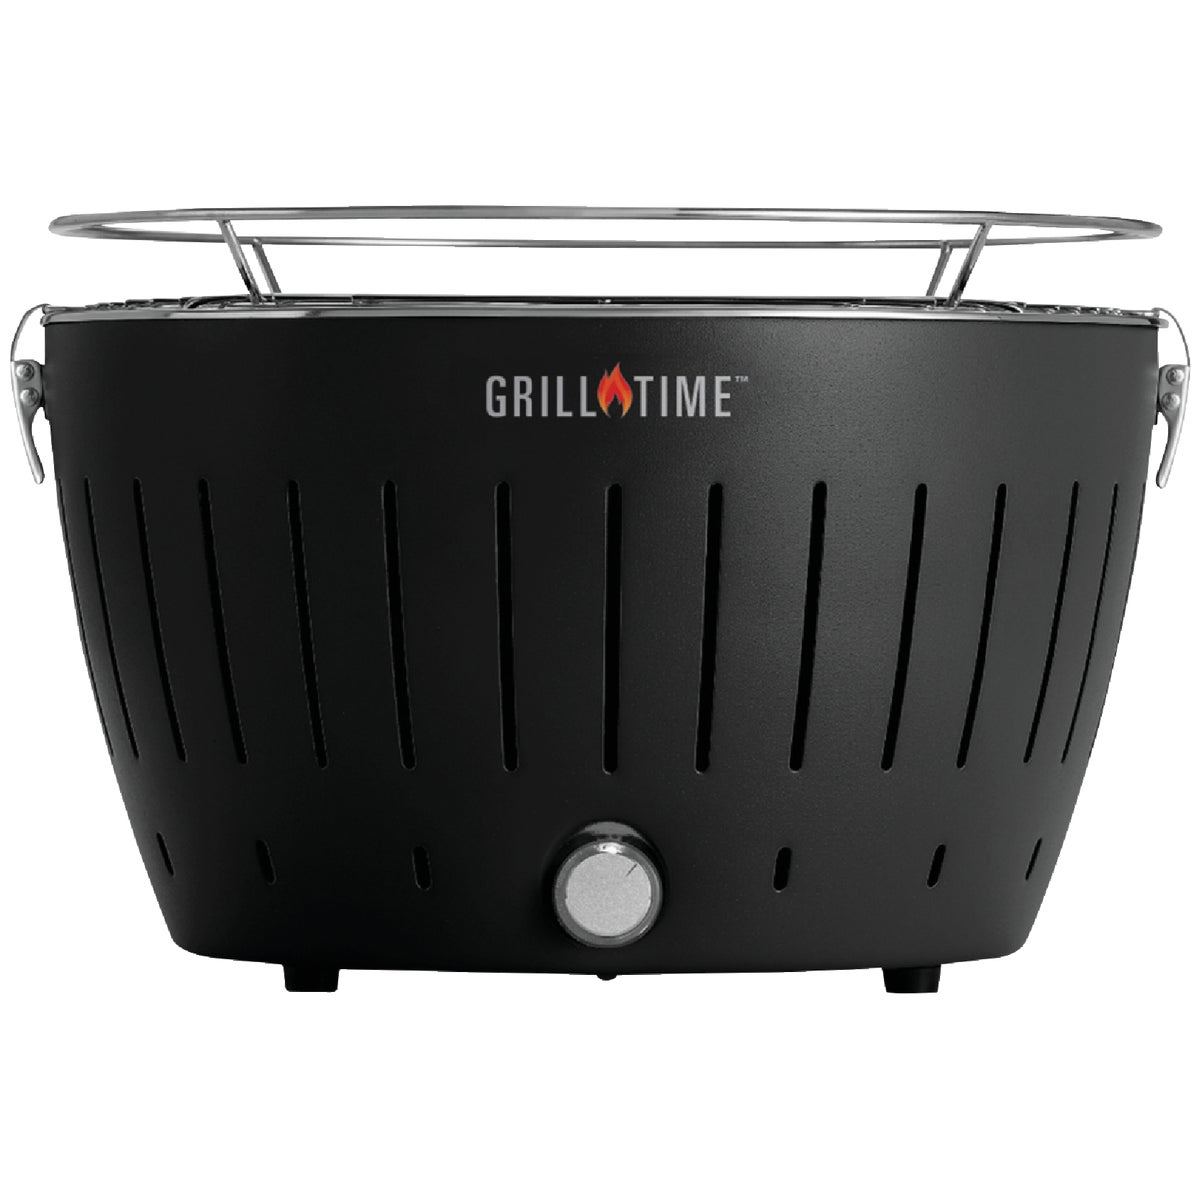 Grill Time Tailgater GT Gray 124 Sq. In. Charcoal Portable Grill